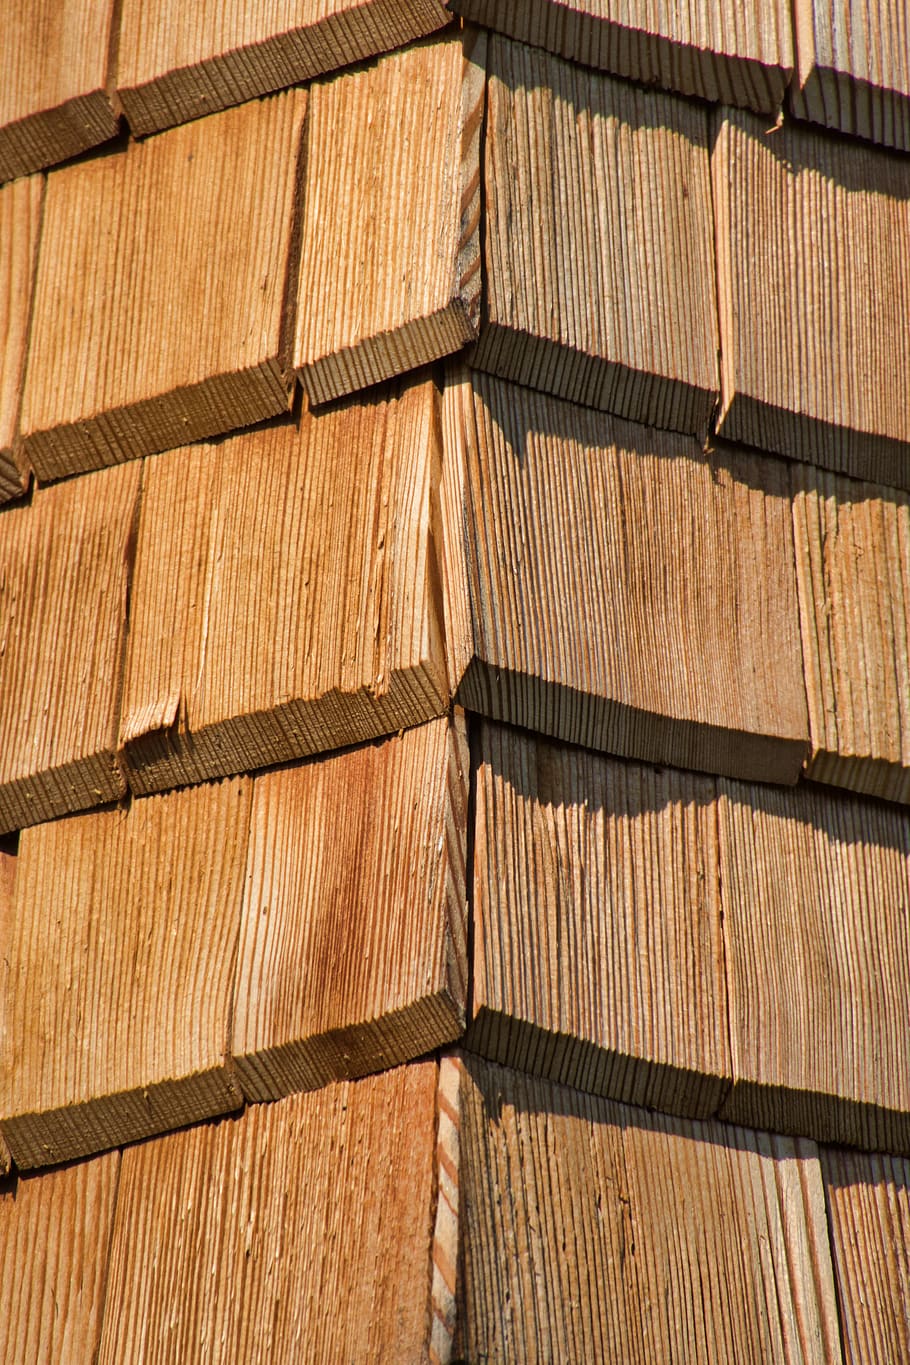 shingle, wood shingles, facade, facade cladding, full frame, backgrounds, pattern, brown, wood - material, wood